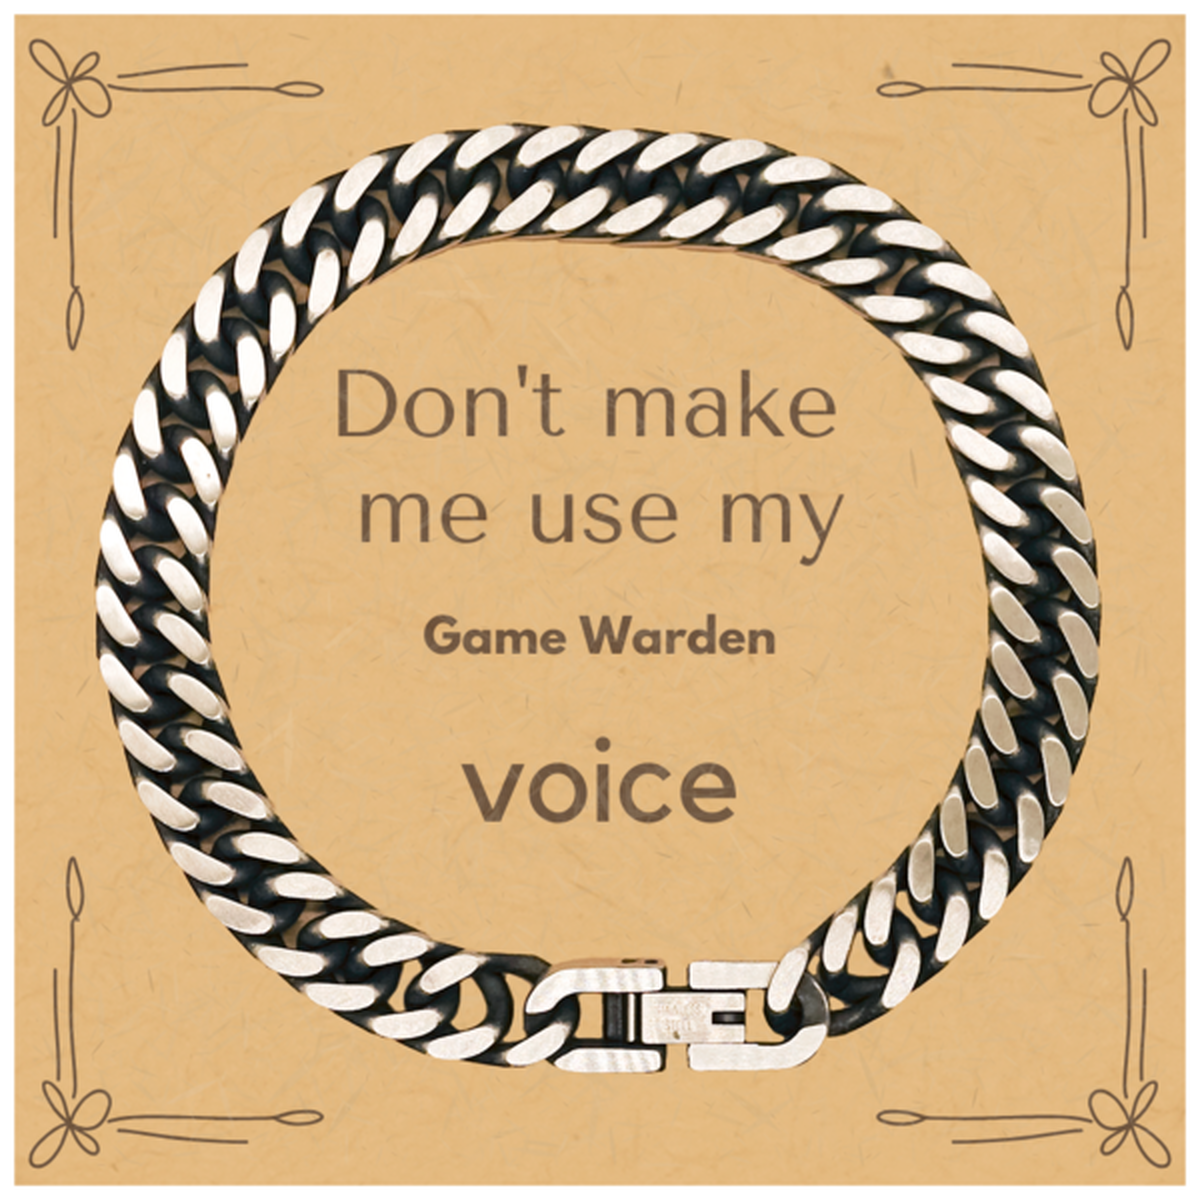 Don't make me use my Game Warden voice, Sarcasm Game Warden Card Gifts, Christmas Game Warden Cuban Link Chain Bracelet Birthday Unique Gifts For Game Warden Coworkers, Men, Women, Colleague, Friends